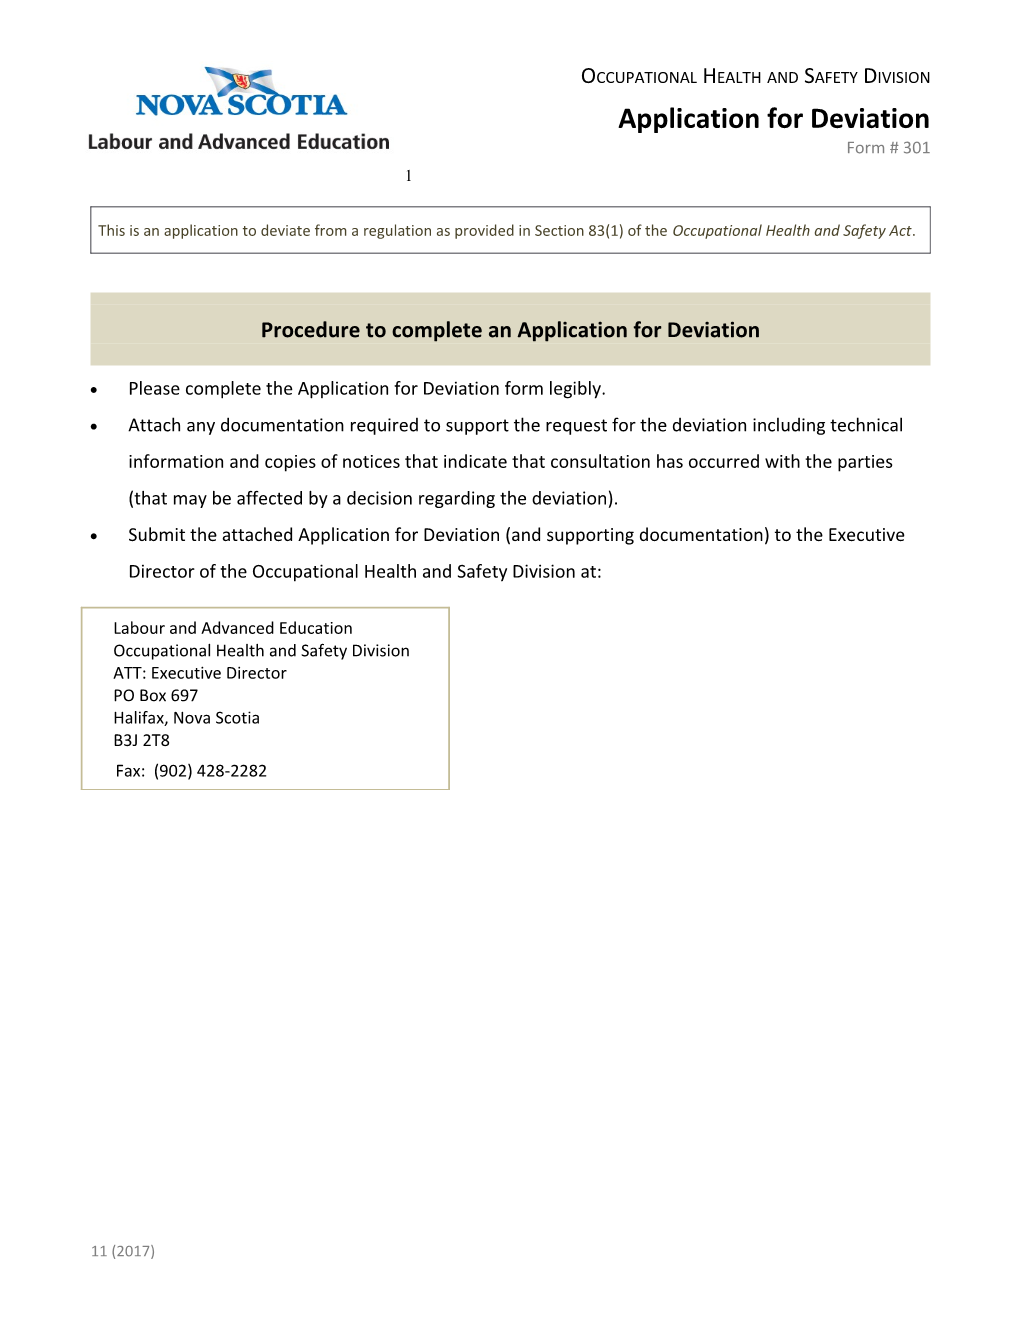 Procedure to Complete an Application for Deviation